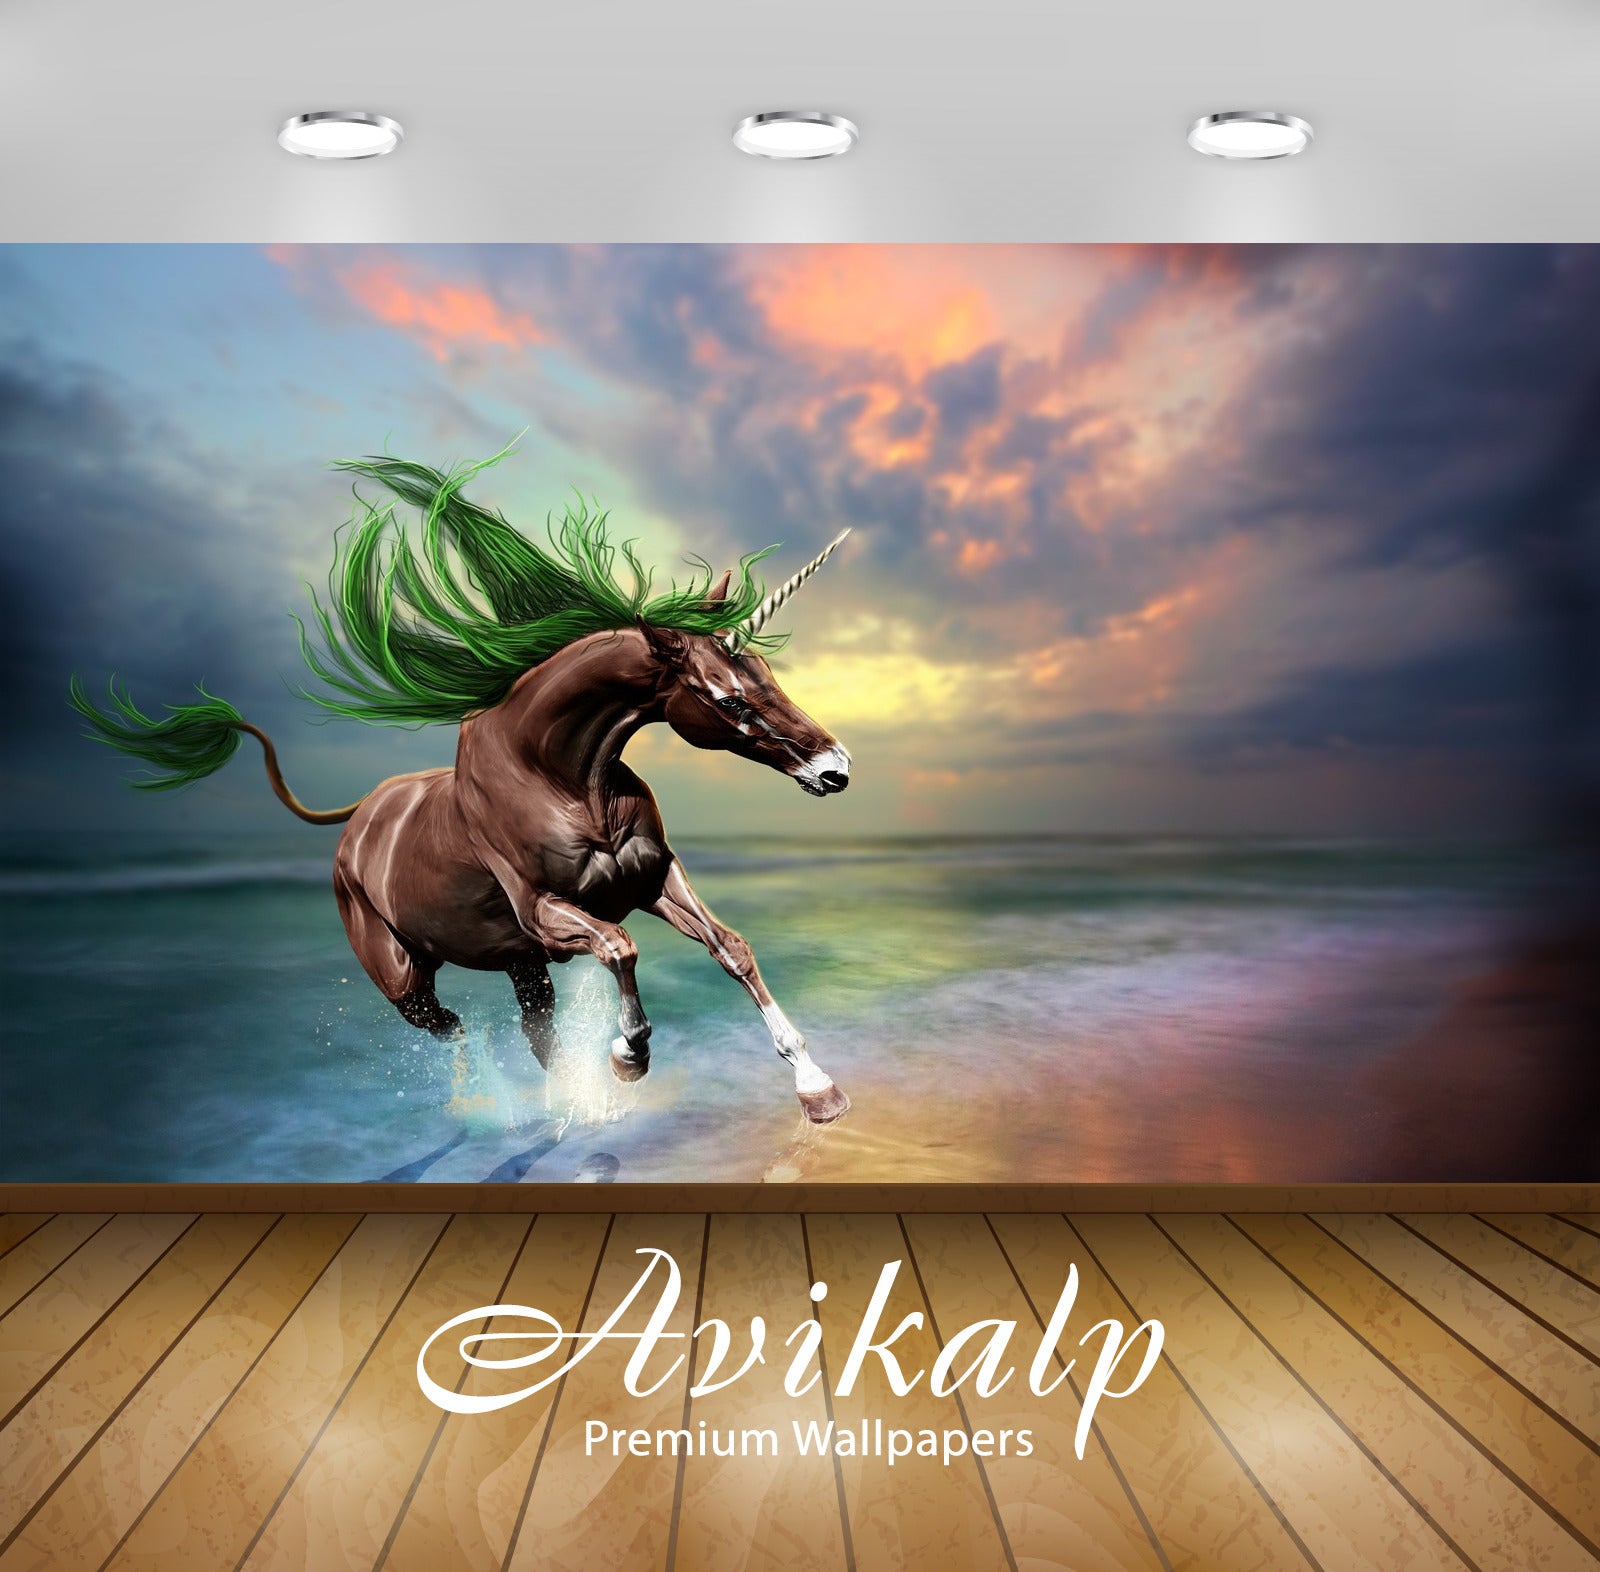 Avikalp Exclusive Awi1936 Running Horse Full HD Wallpapers for Living room, Hall, Kids Room, Kitchen